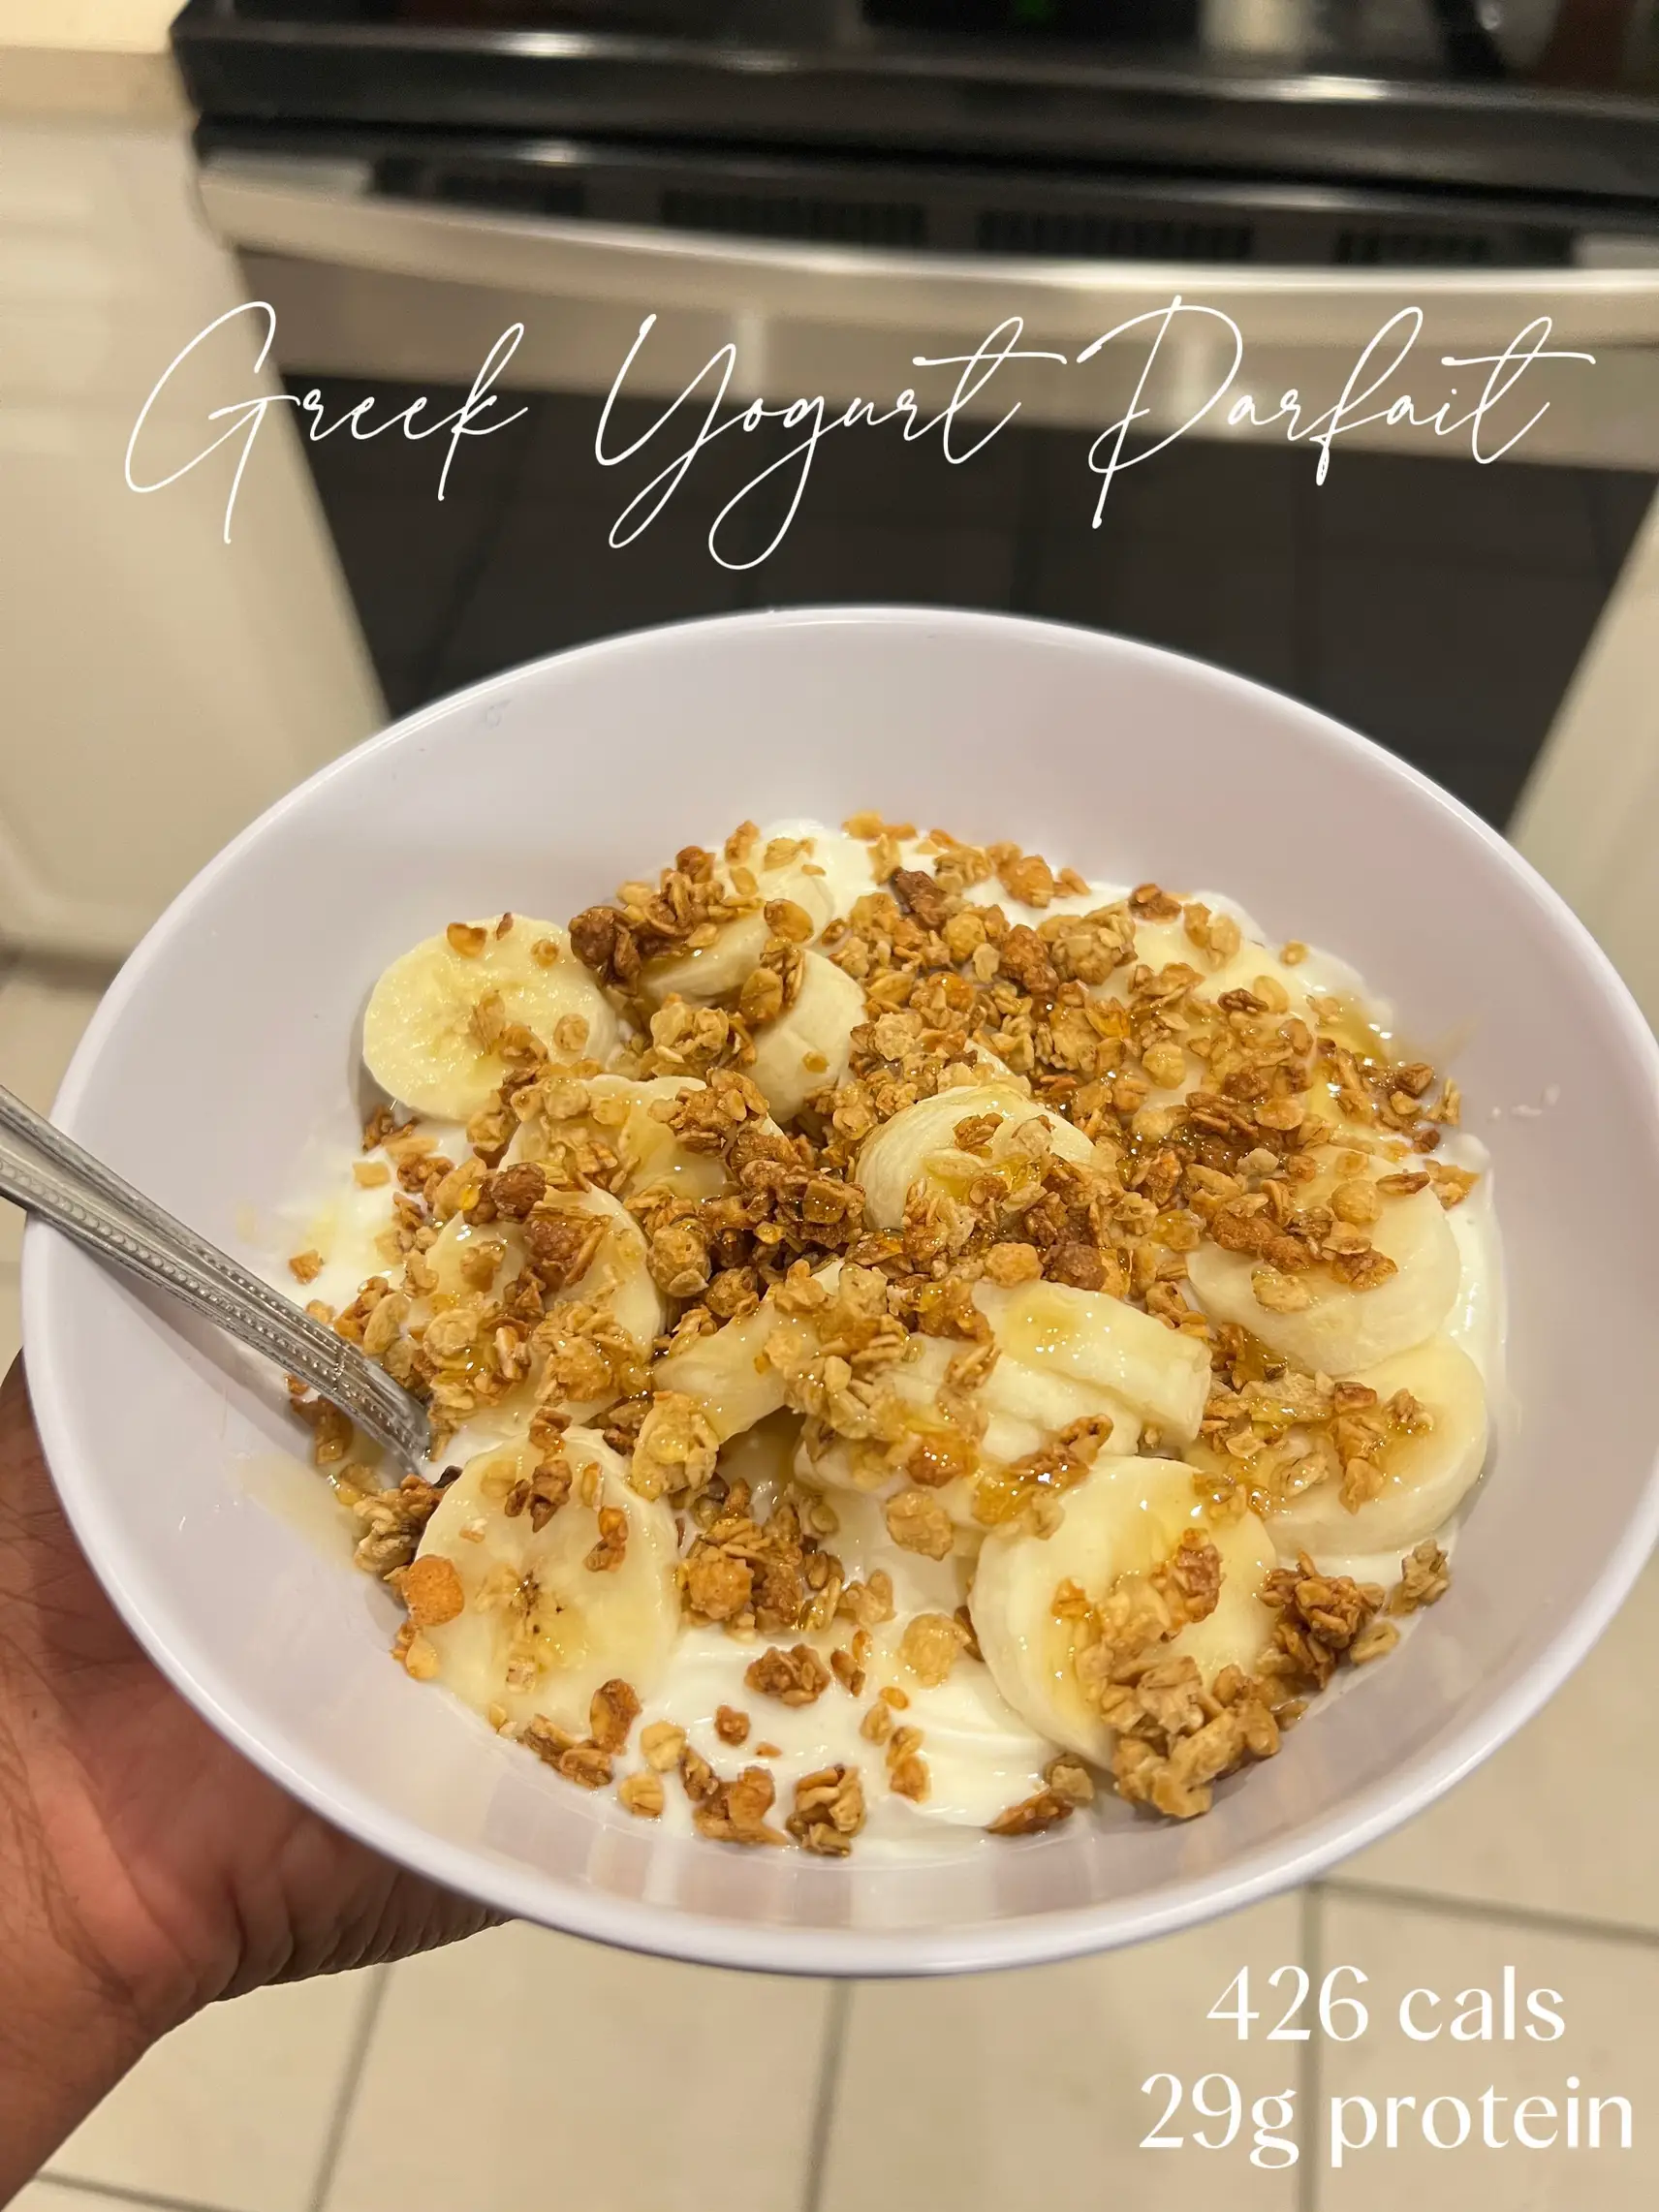 My breakfast today: Granola and Yogurt🥣🥄🌾, Trying to eat a little  healthier!✨